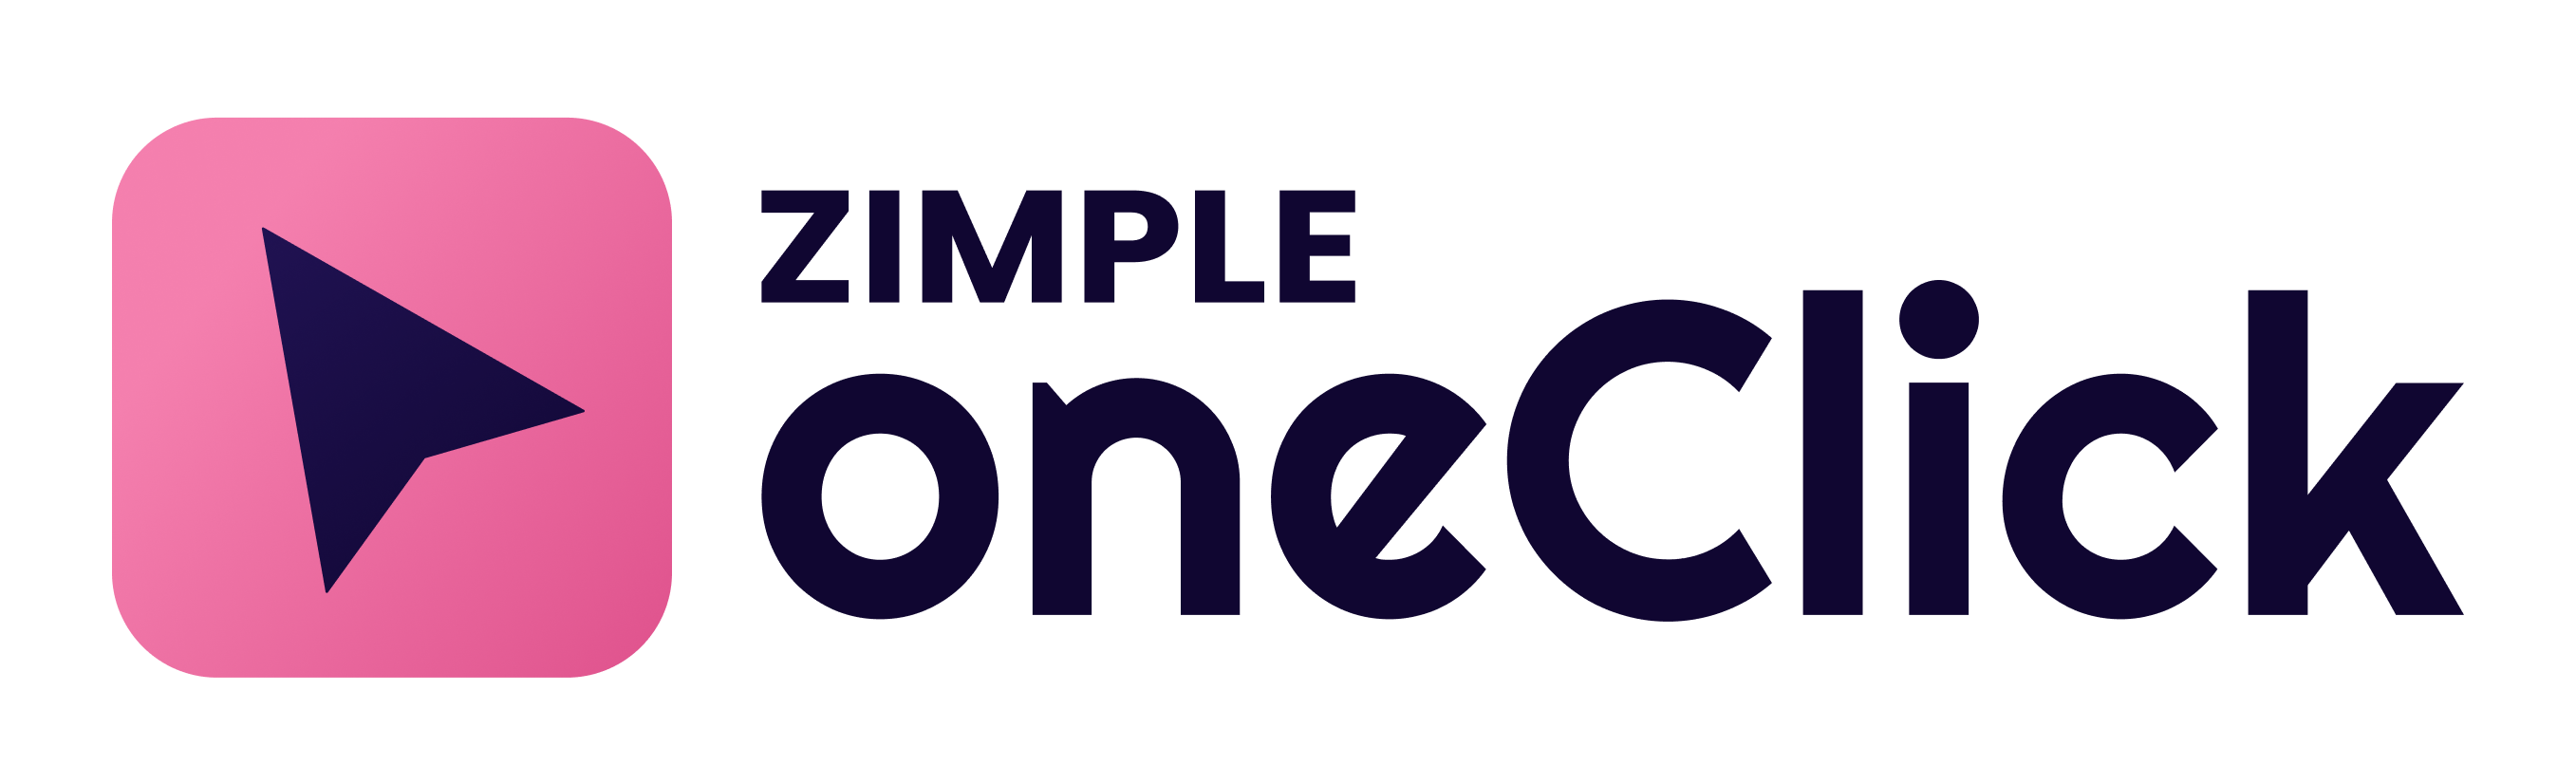 Zimple OneClick